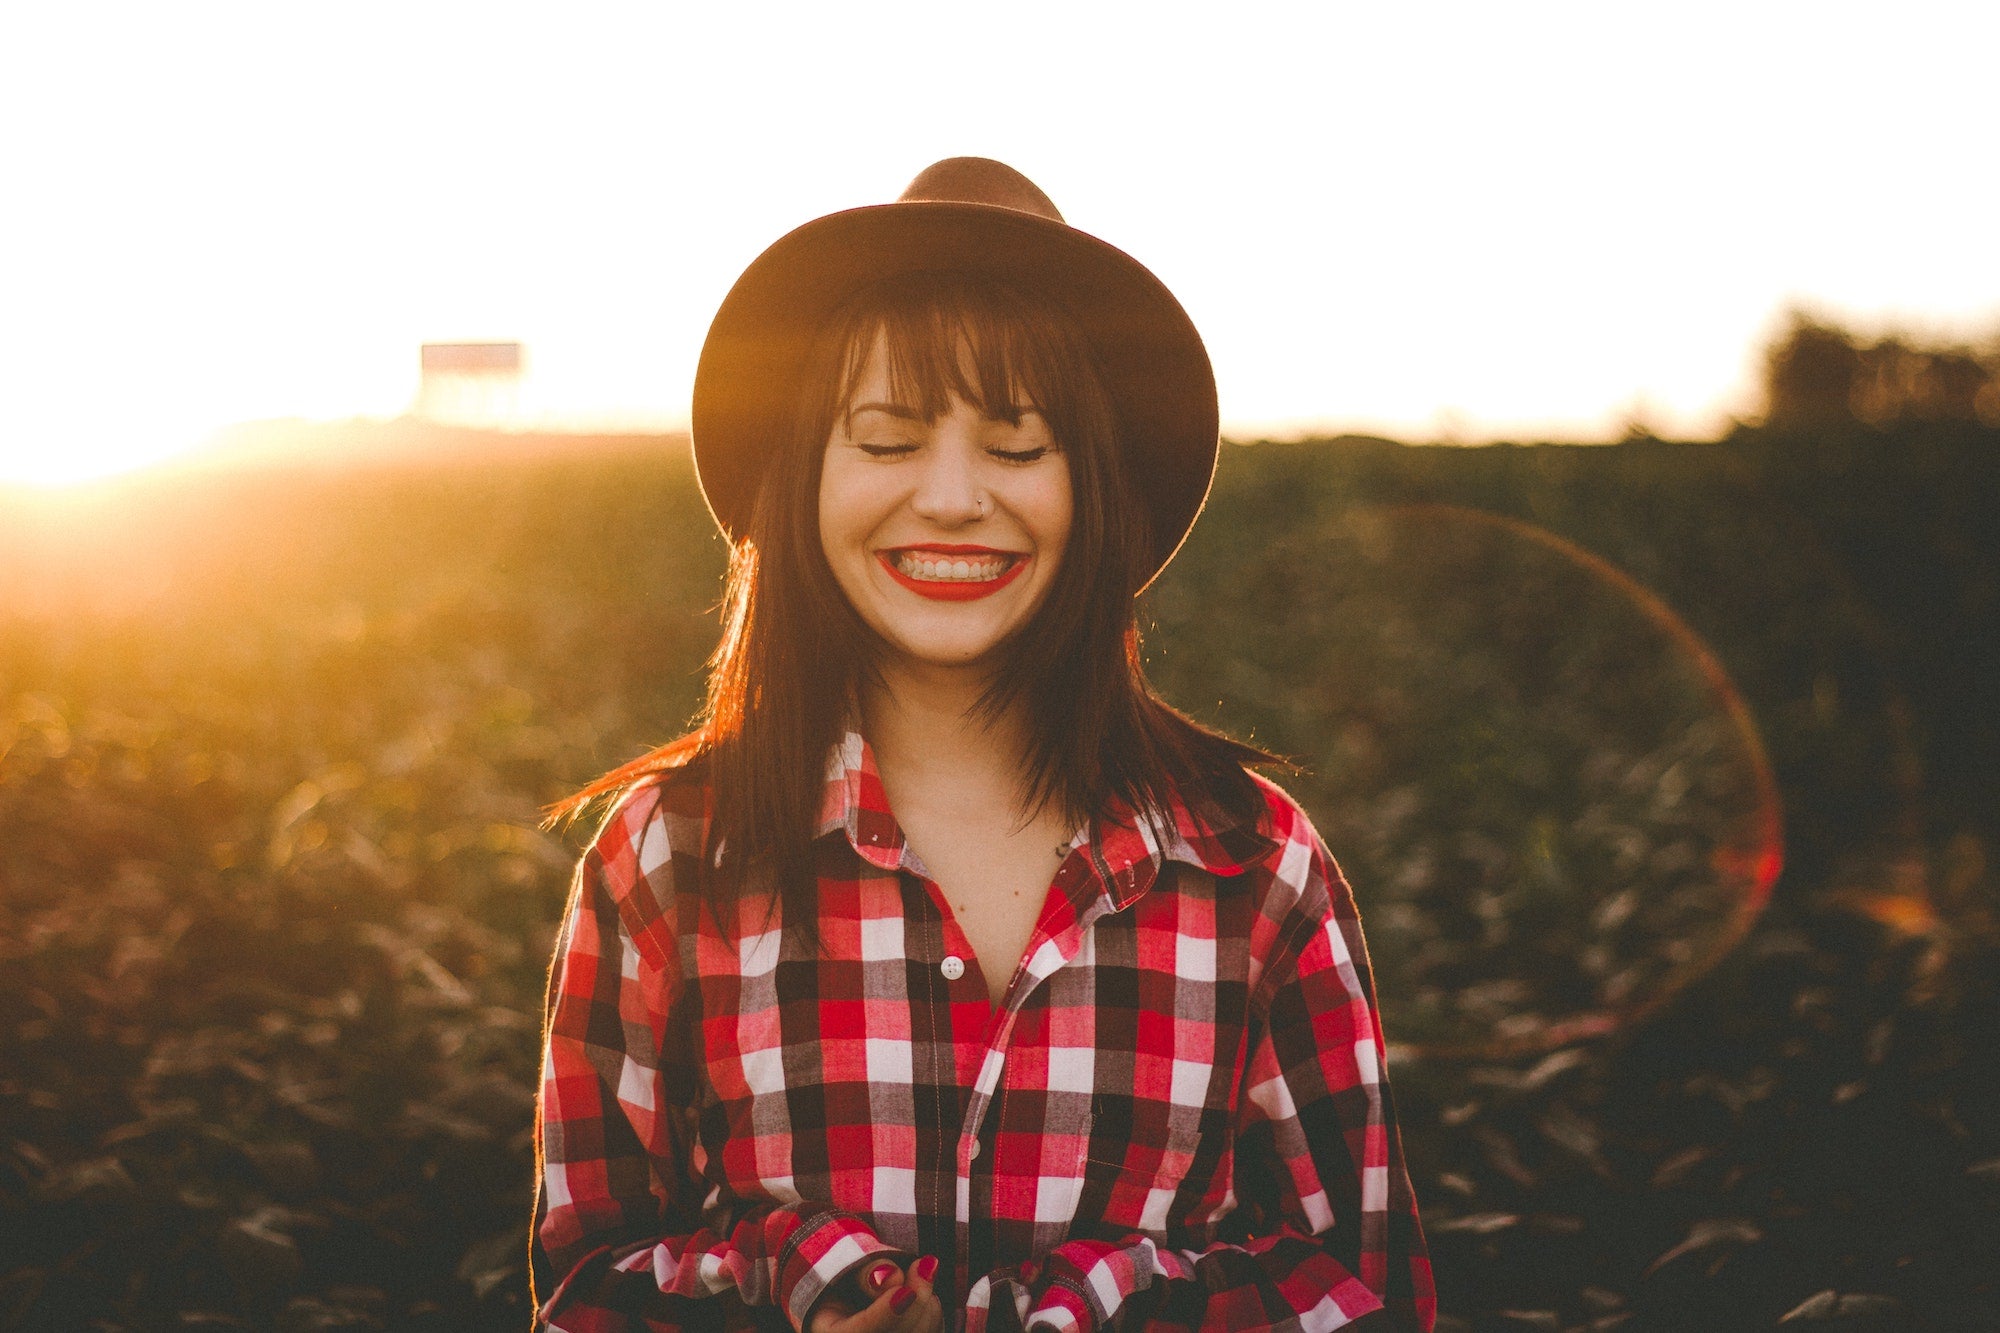 Woman in plaid shirt and hat, smiling with her eyes closed during golden hour